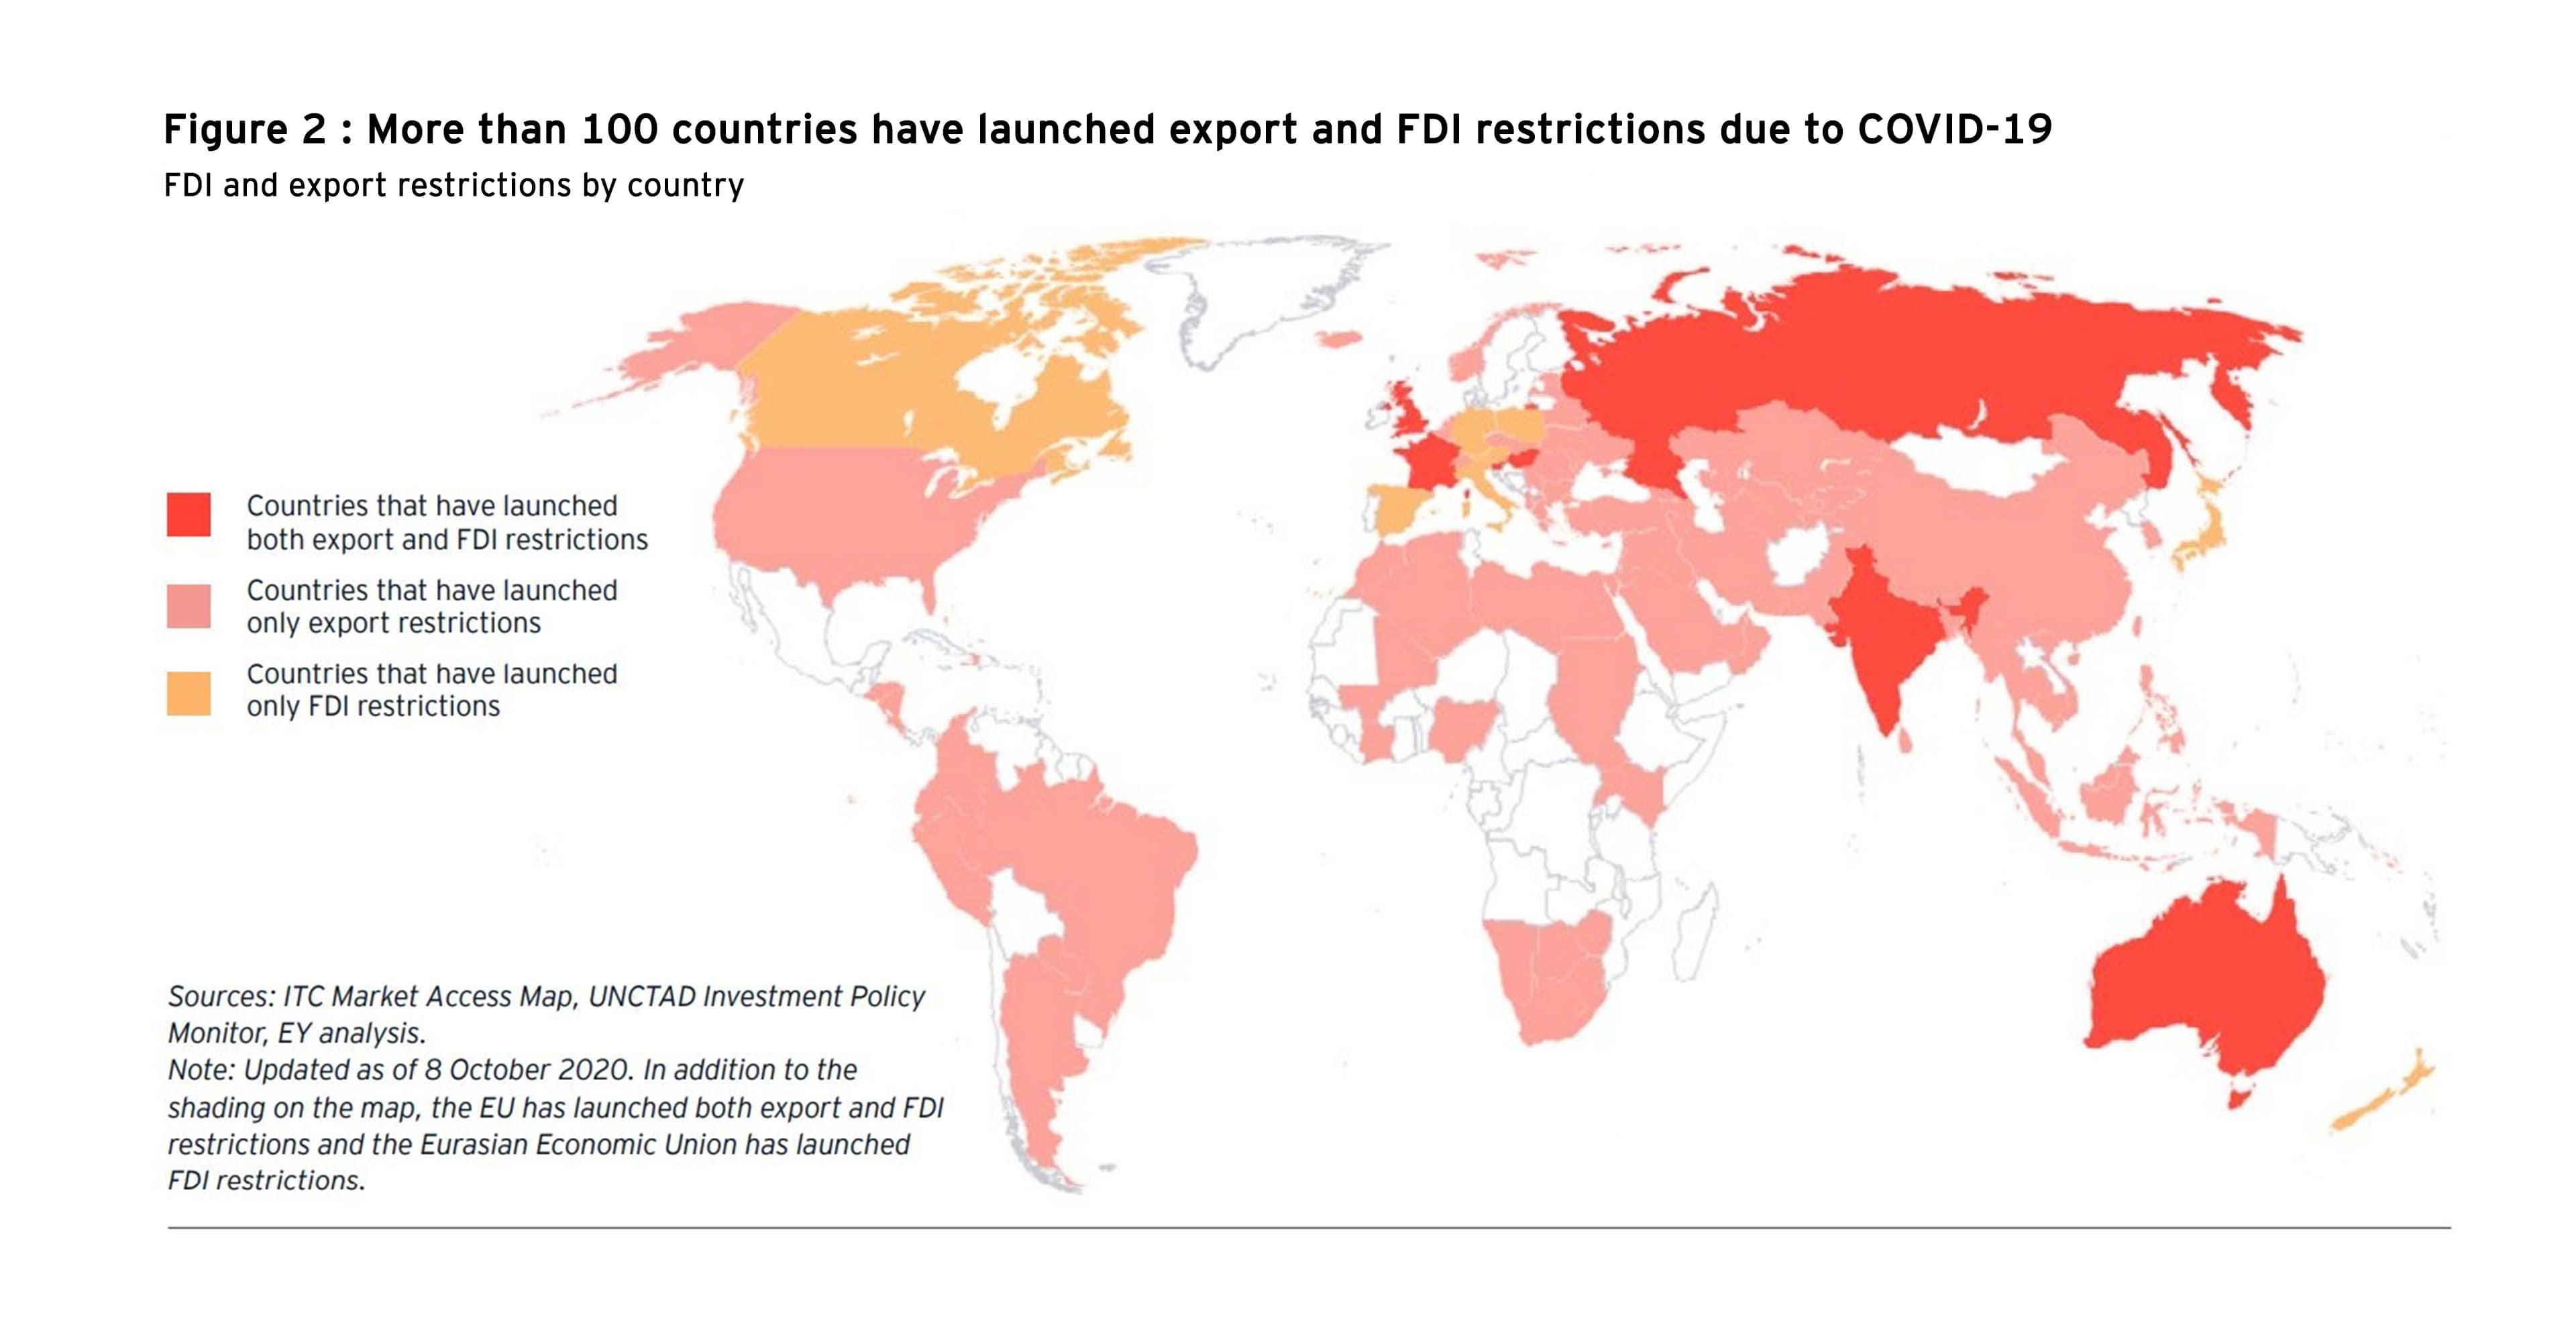 Export and FDI restrictions in COVID-19